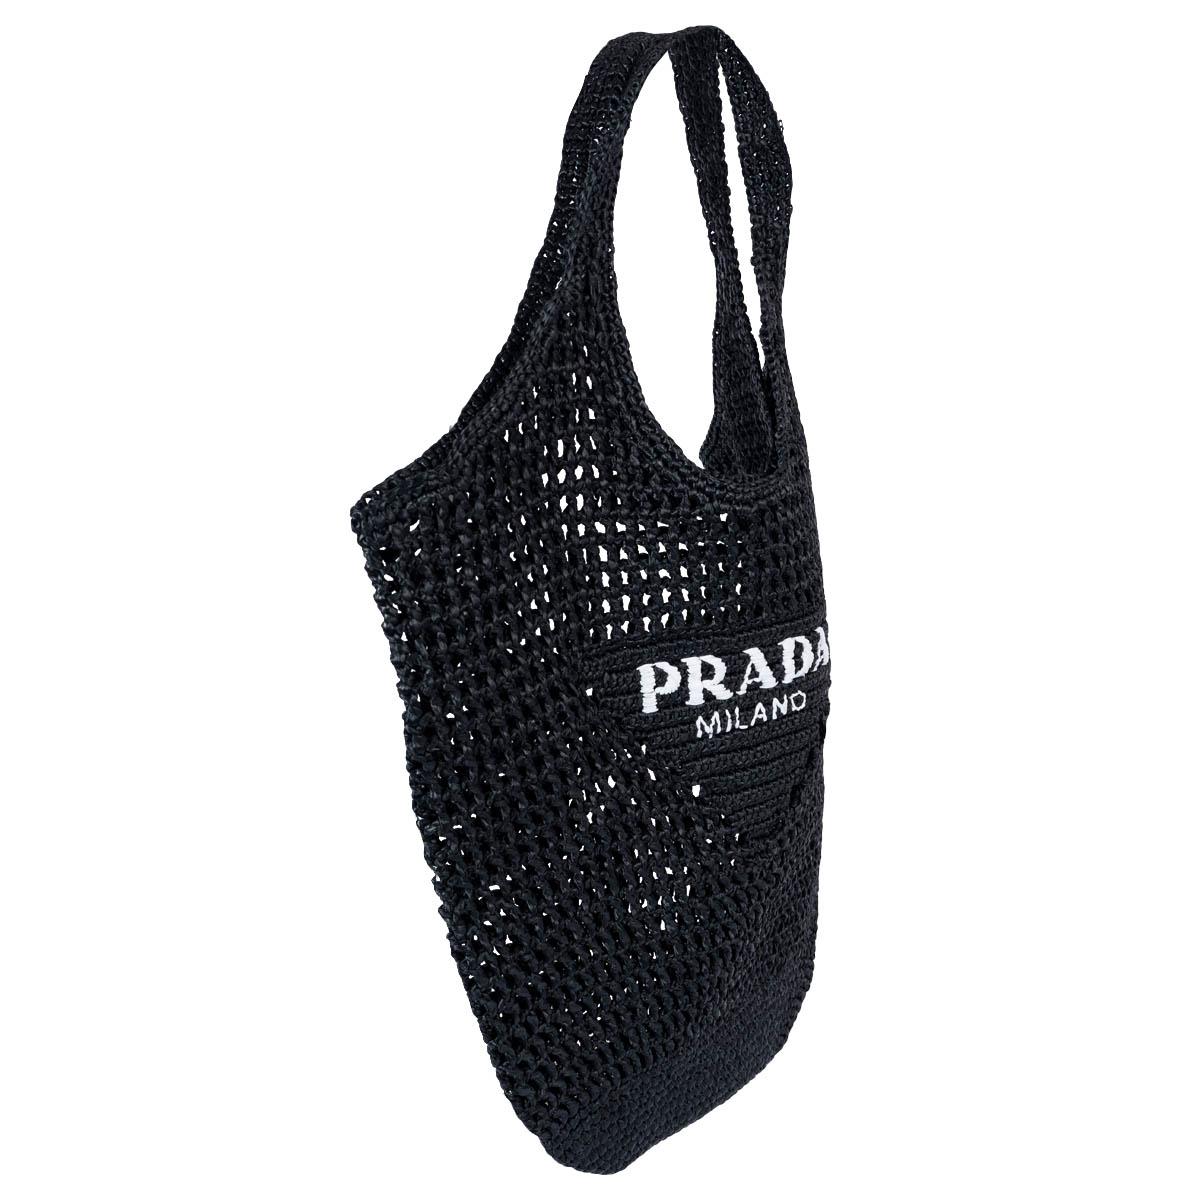 100% authentic Prada Logo crochet tote bag with a soft, deconstructed design made of raffia-effect yarn. The embroidered white lettering logo decorates the front of this accessory that reinterprets the beach bag concept in a new and contemporary